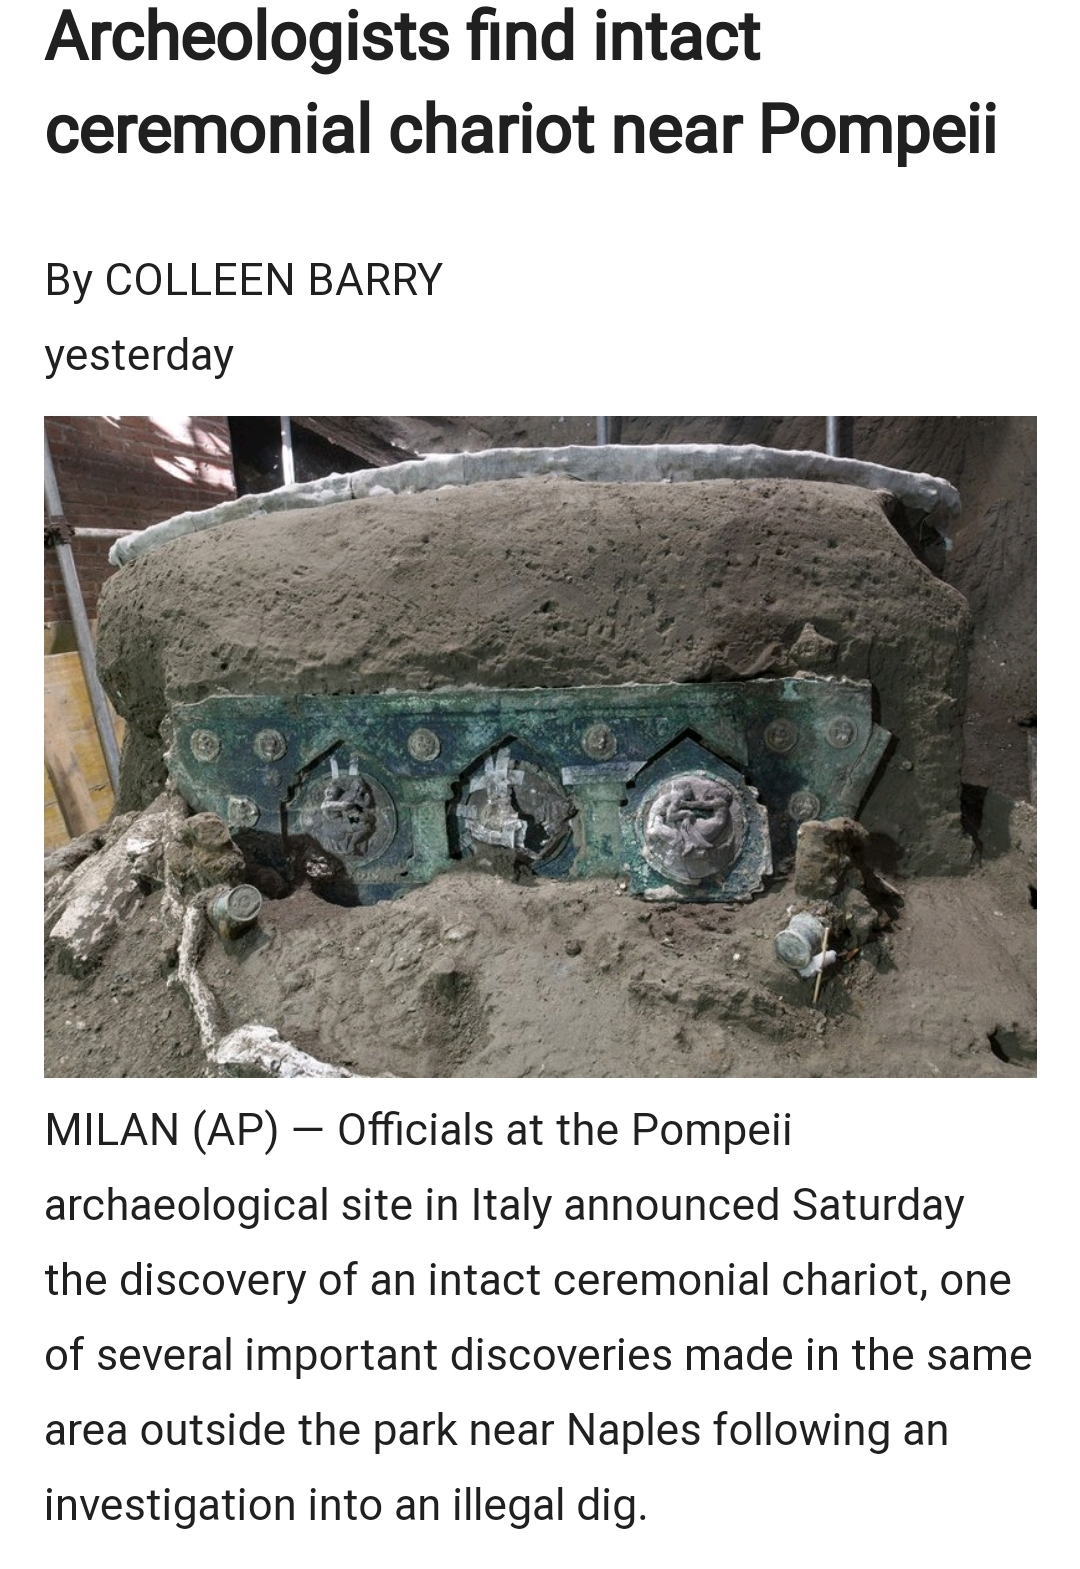 soil - Archeologists find intact ceremonial chariot near Pompeii By Colleen Barry yesterday Milan Ap Officials at the Pompeii archaeological site in Italy announced Saturday the discovery of an intact ceremonial chariot, one of several important discoveri